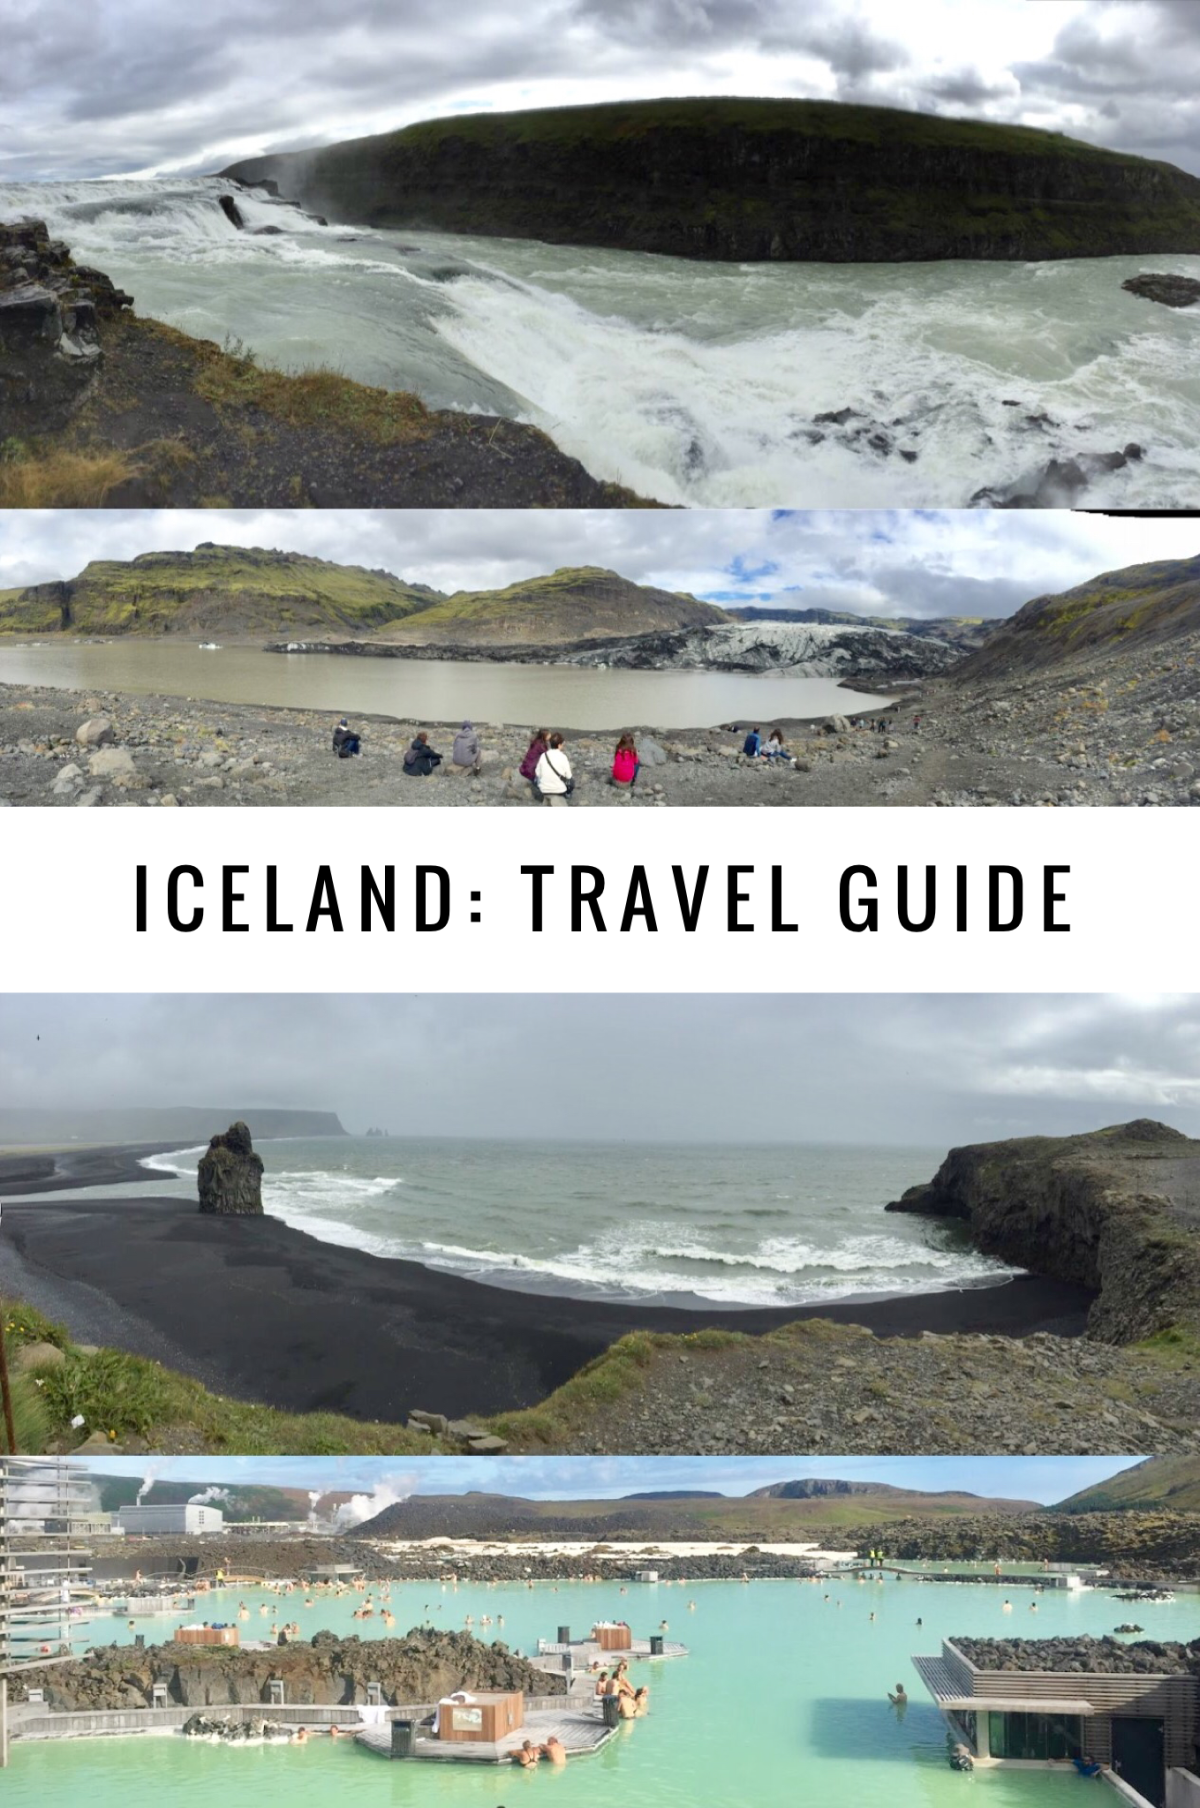 Iceland: Travel Guide